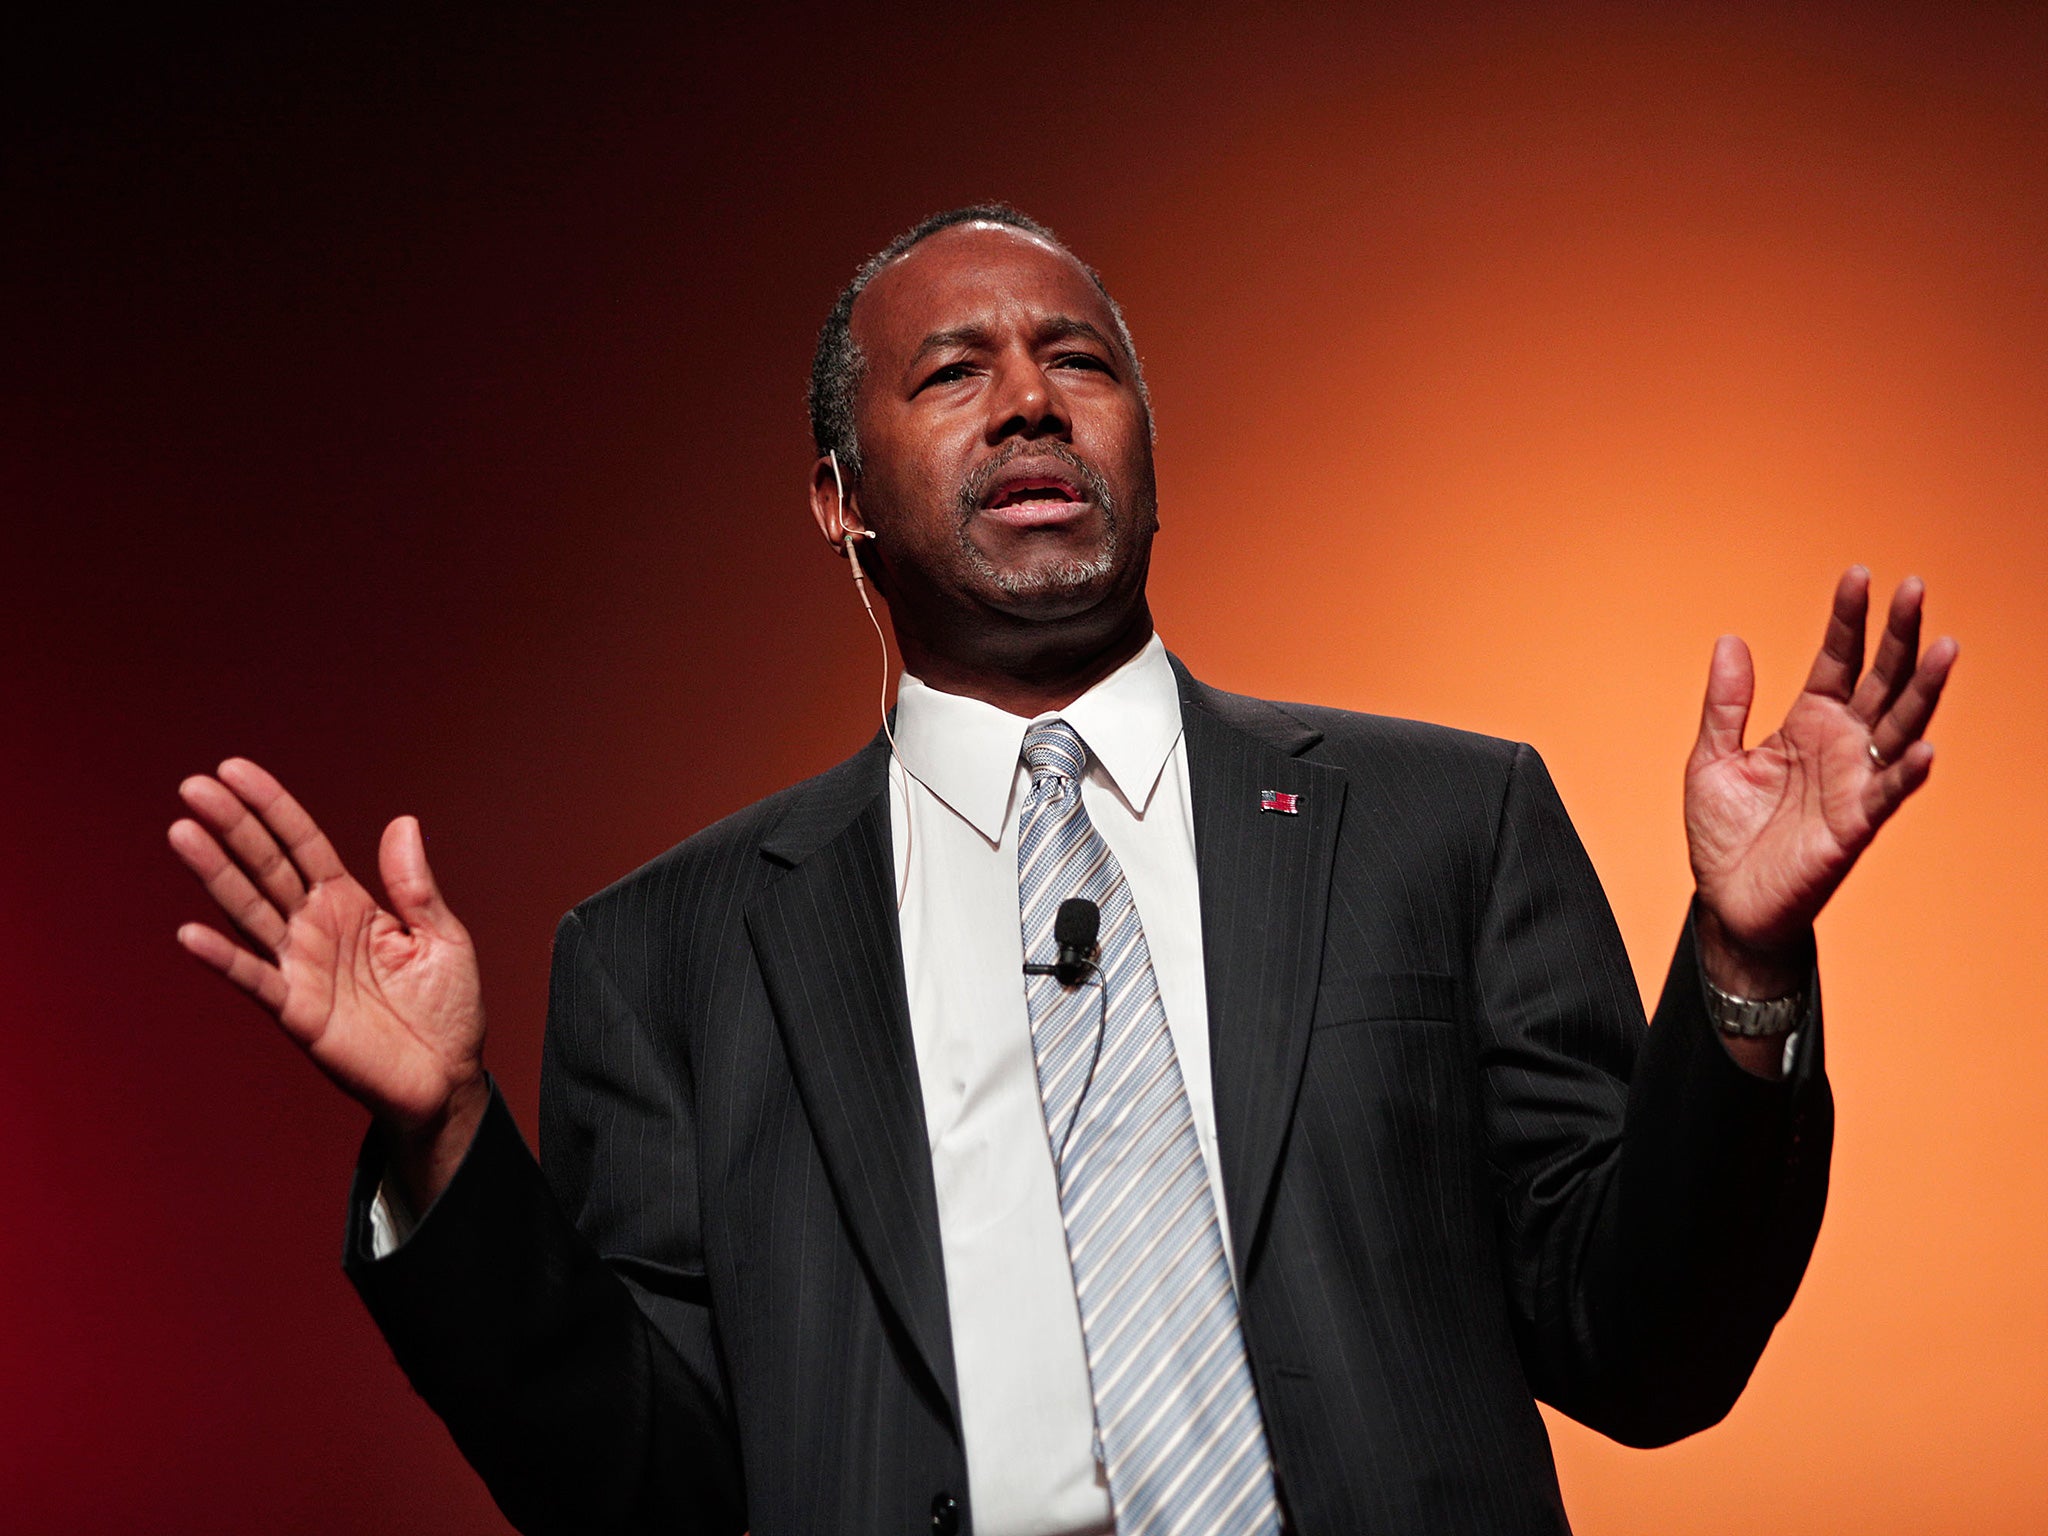 Ben Carson has sparked controversy after saying that he 'would not advocate [putting] a Muslim in charge of this nation'